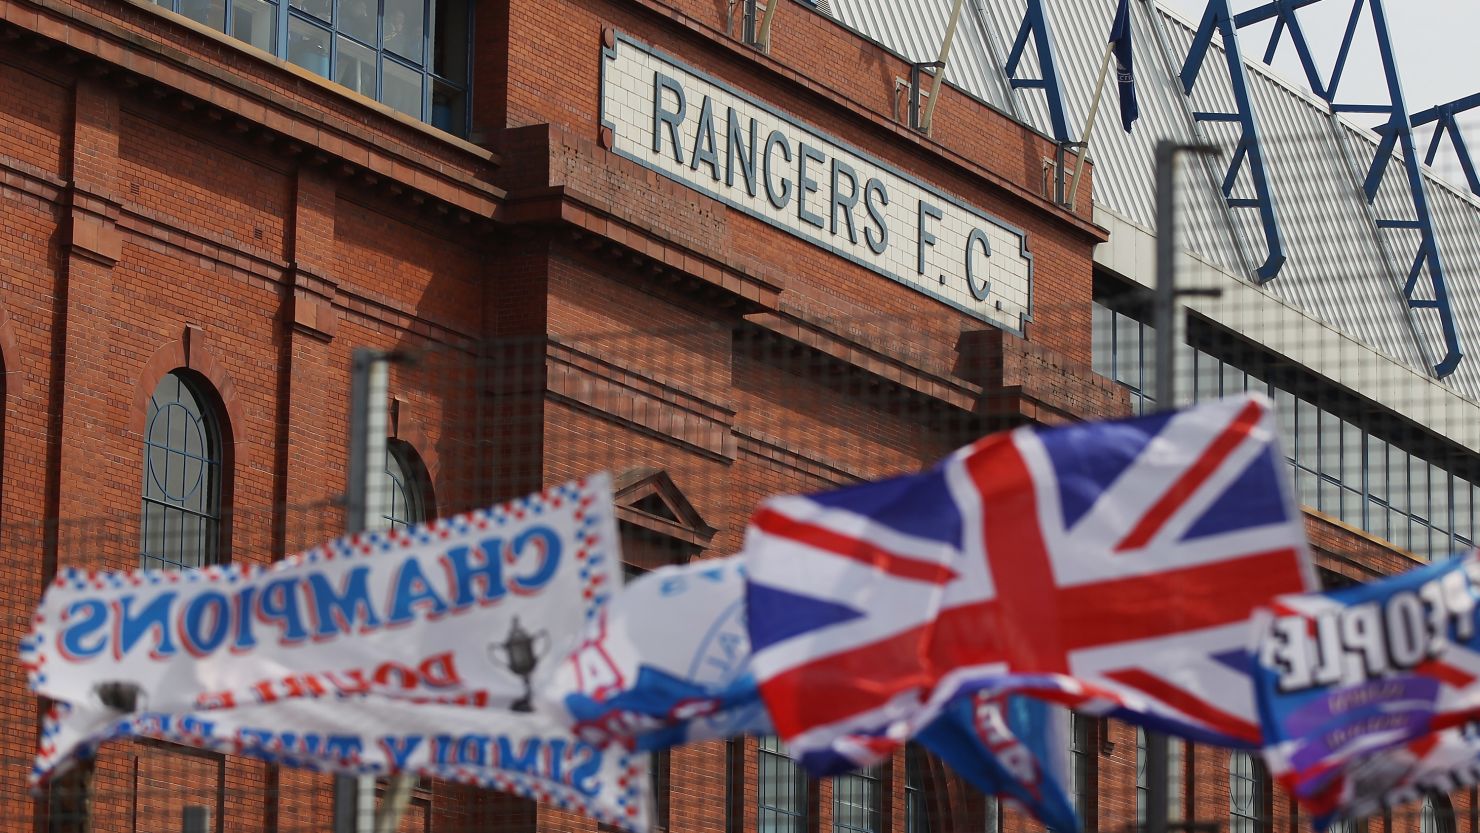 Glasgow Rangers have been crowned champions of Scotland 54 times and won the title in 2011.